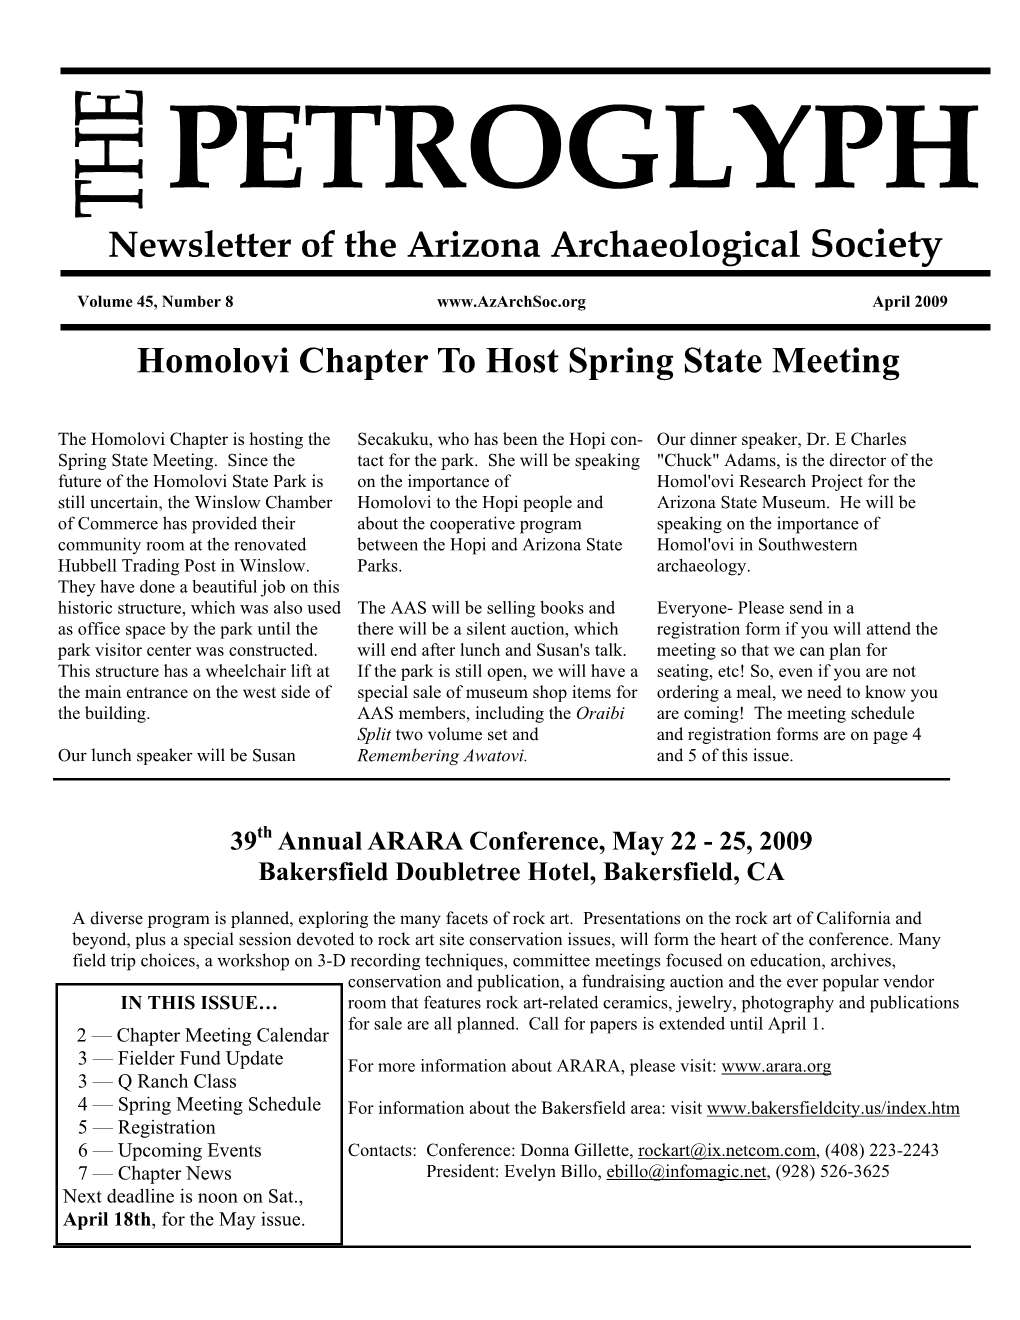 Newsletter of the Arizona Archaeological Society Homolovi Chapter to Host Spring State Meeting